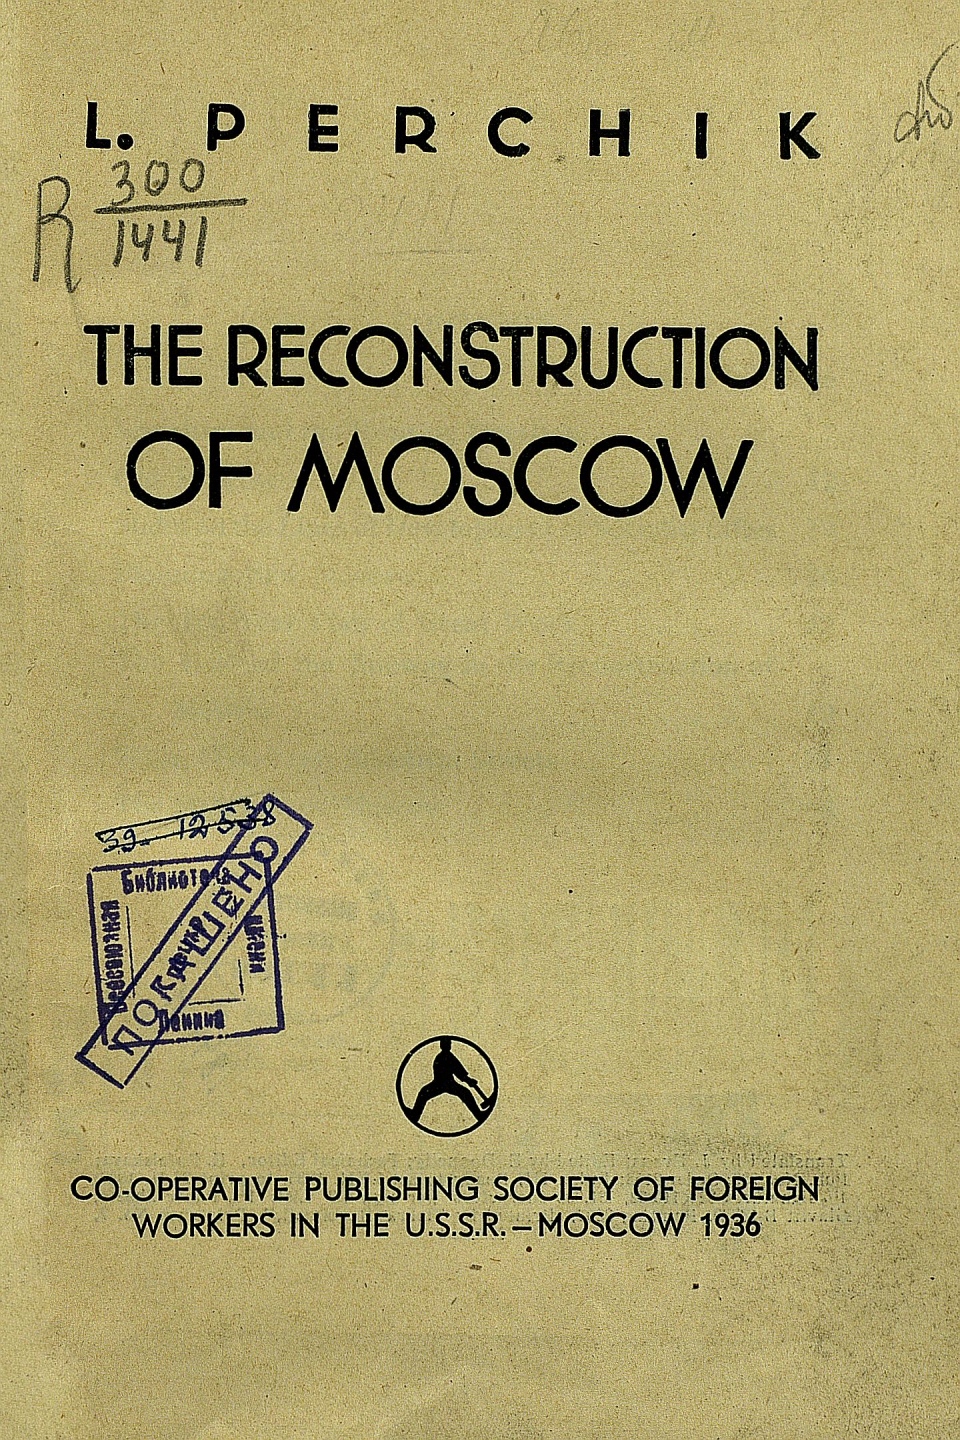 The Reconstruction of Moscow / by L. Perchik ; translated by J. Evans. — Moscow : Co-operative publishing society of foreign workers in the U.S.S.R., 1936